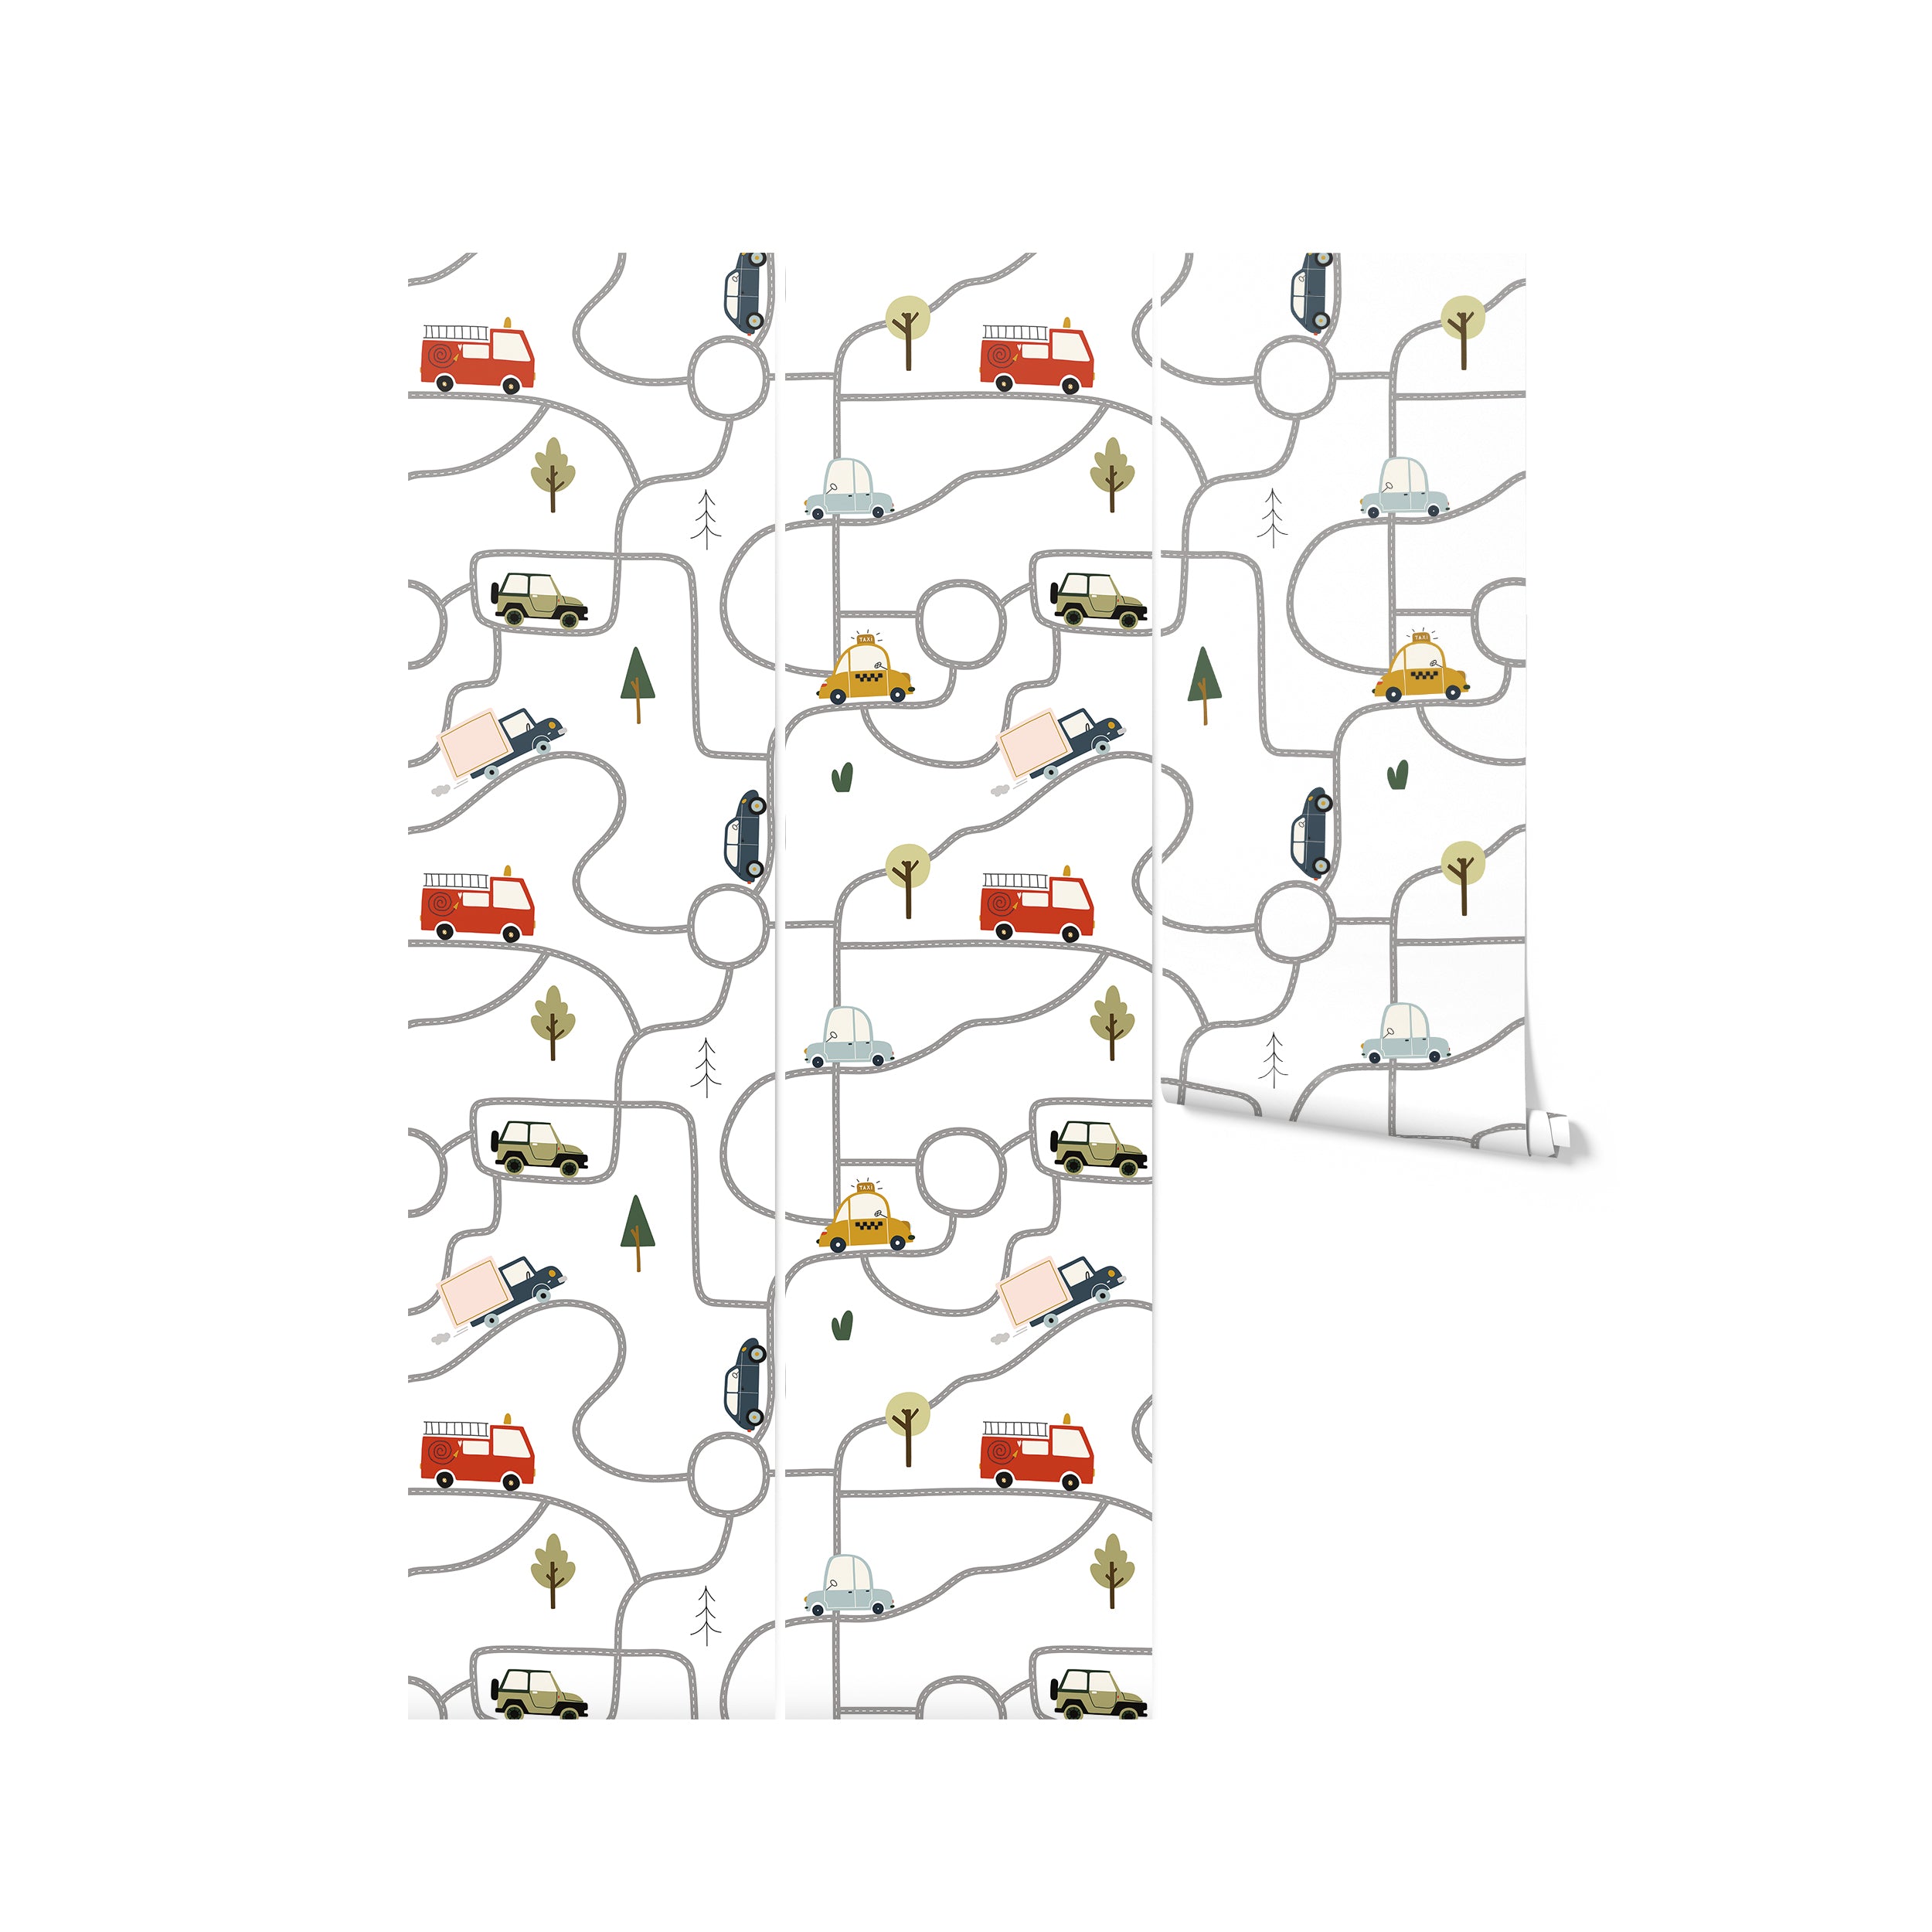 Rolls of Car and Map Wallpaper showcasing a detailed and interactive map layout with colorful cars, buses, and taxis navigating through winding roads, surrounded by minimalistic greenery. Ideal for a child's bedroom or playroom, this wallpaper encourages playful exploration and storytelling